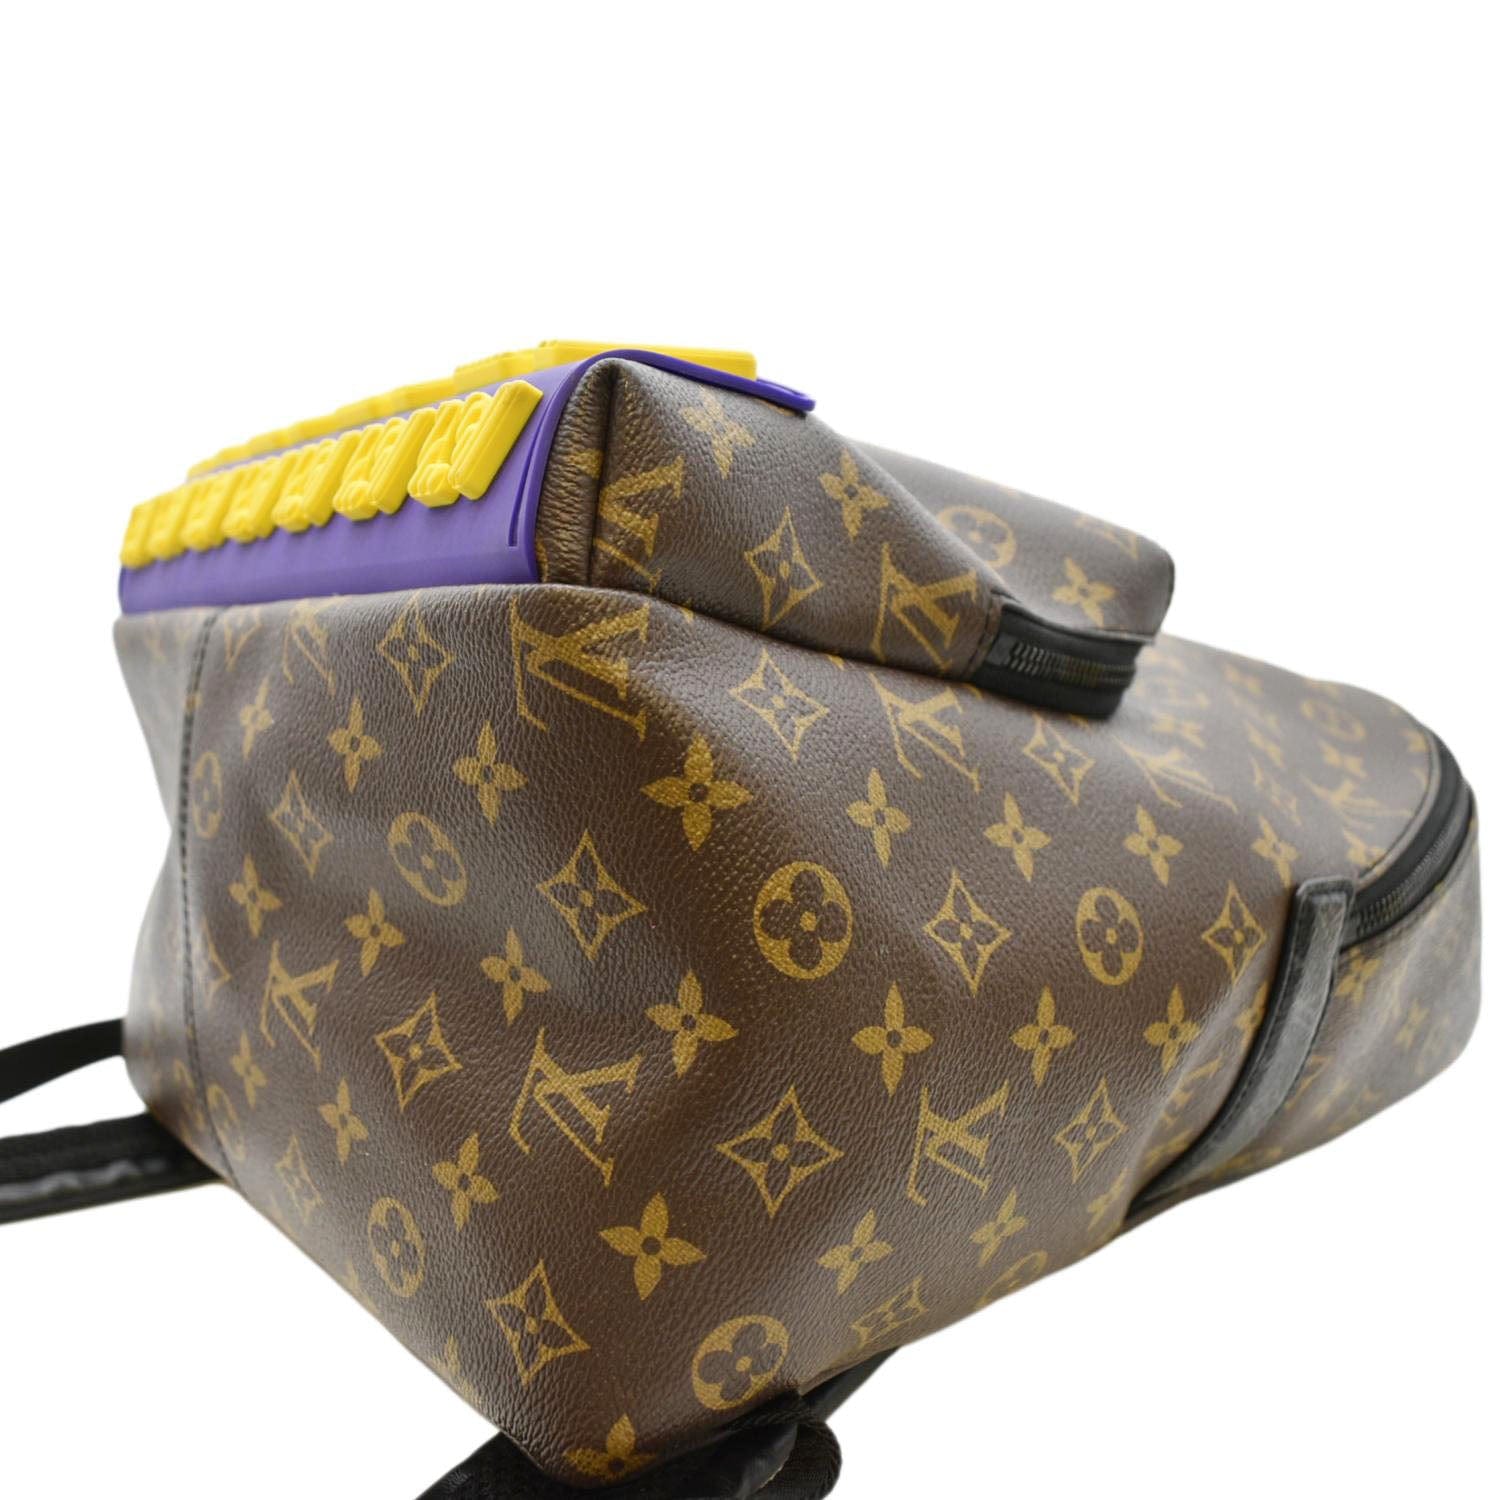 Louis Vuitton Discovery LV Rubber Monogram Canvas Backpack Brown